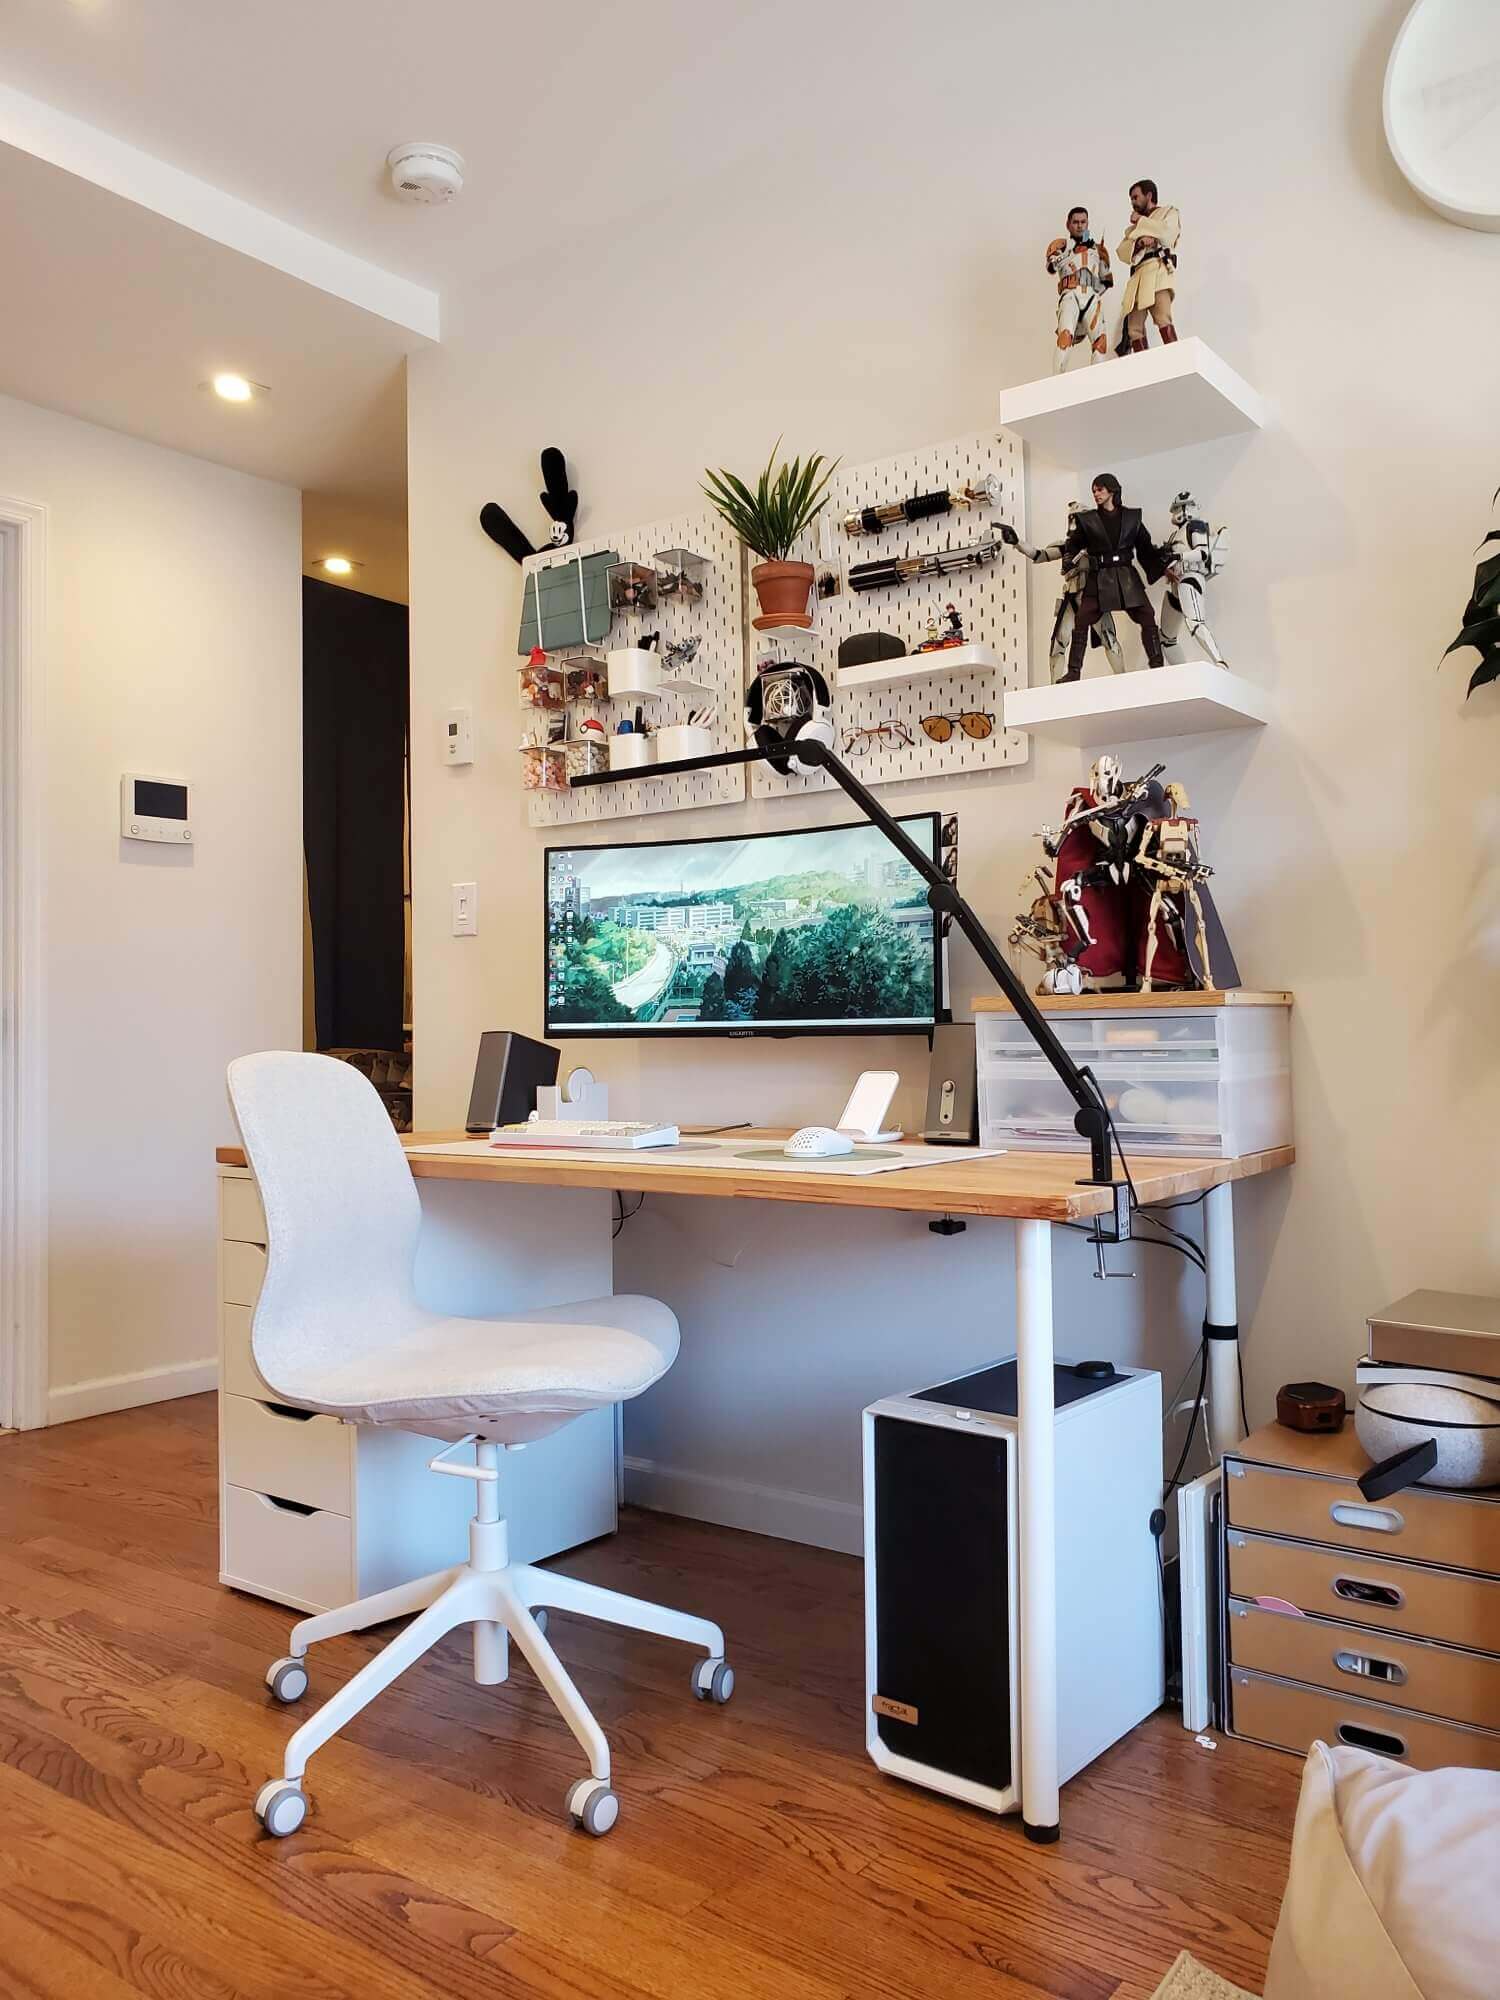 Ryoma has managed to build a desk setup that combines functionality, minimalism, and lots of personal touches